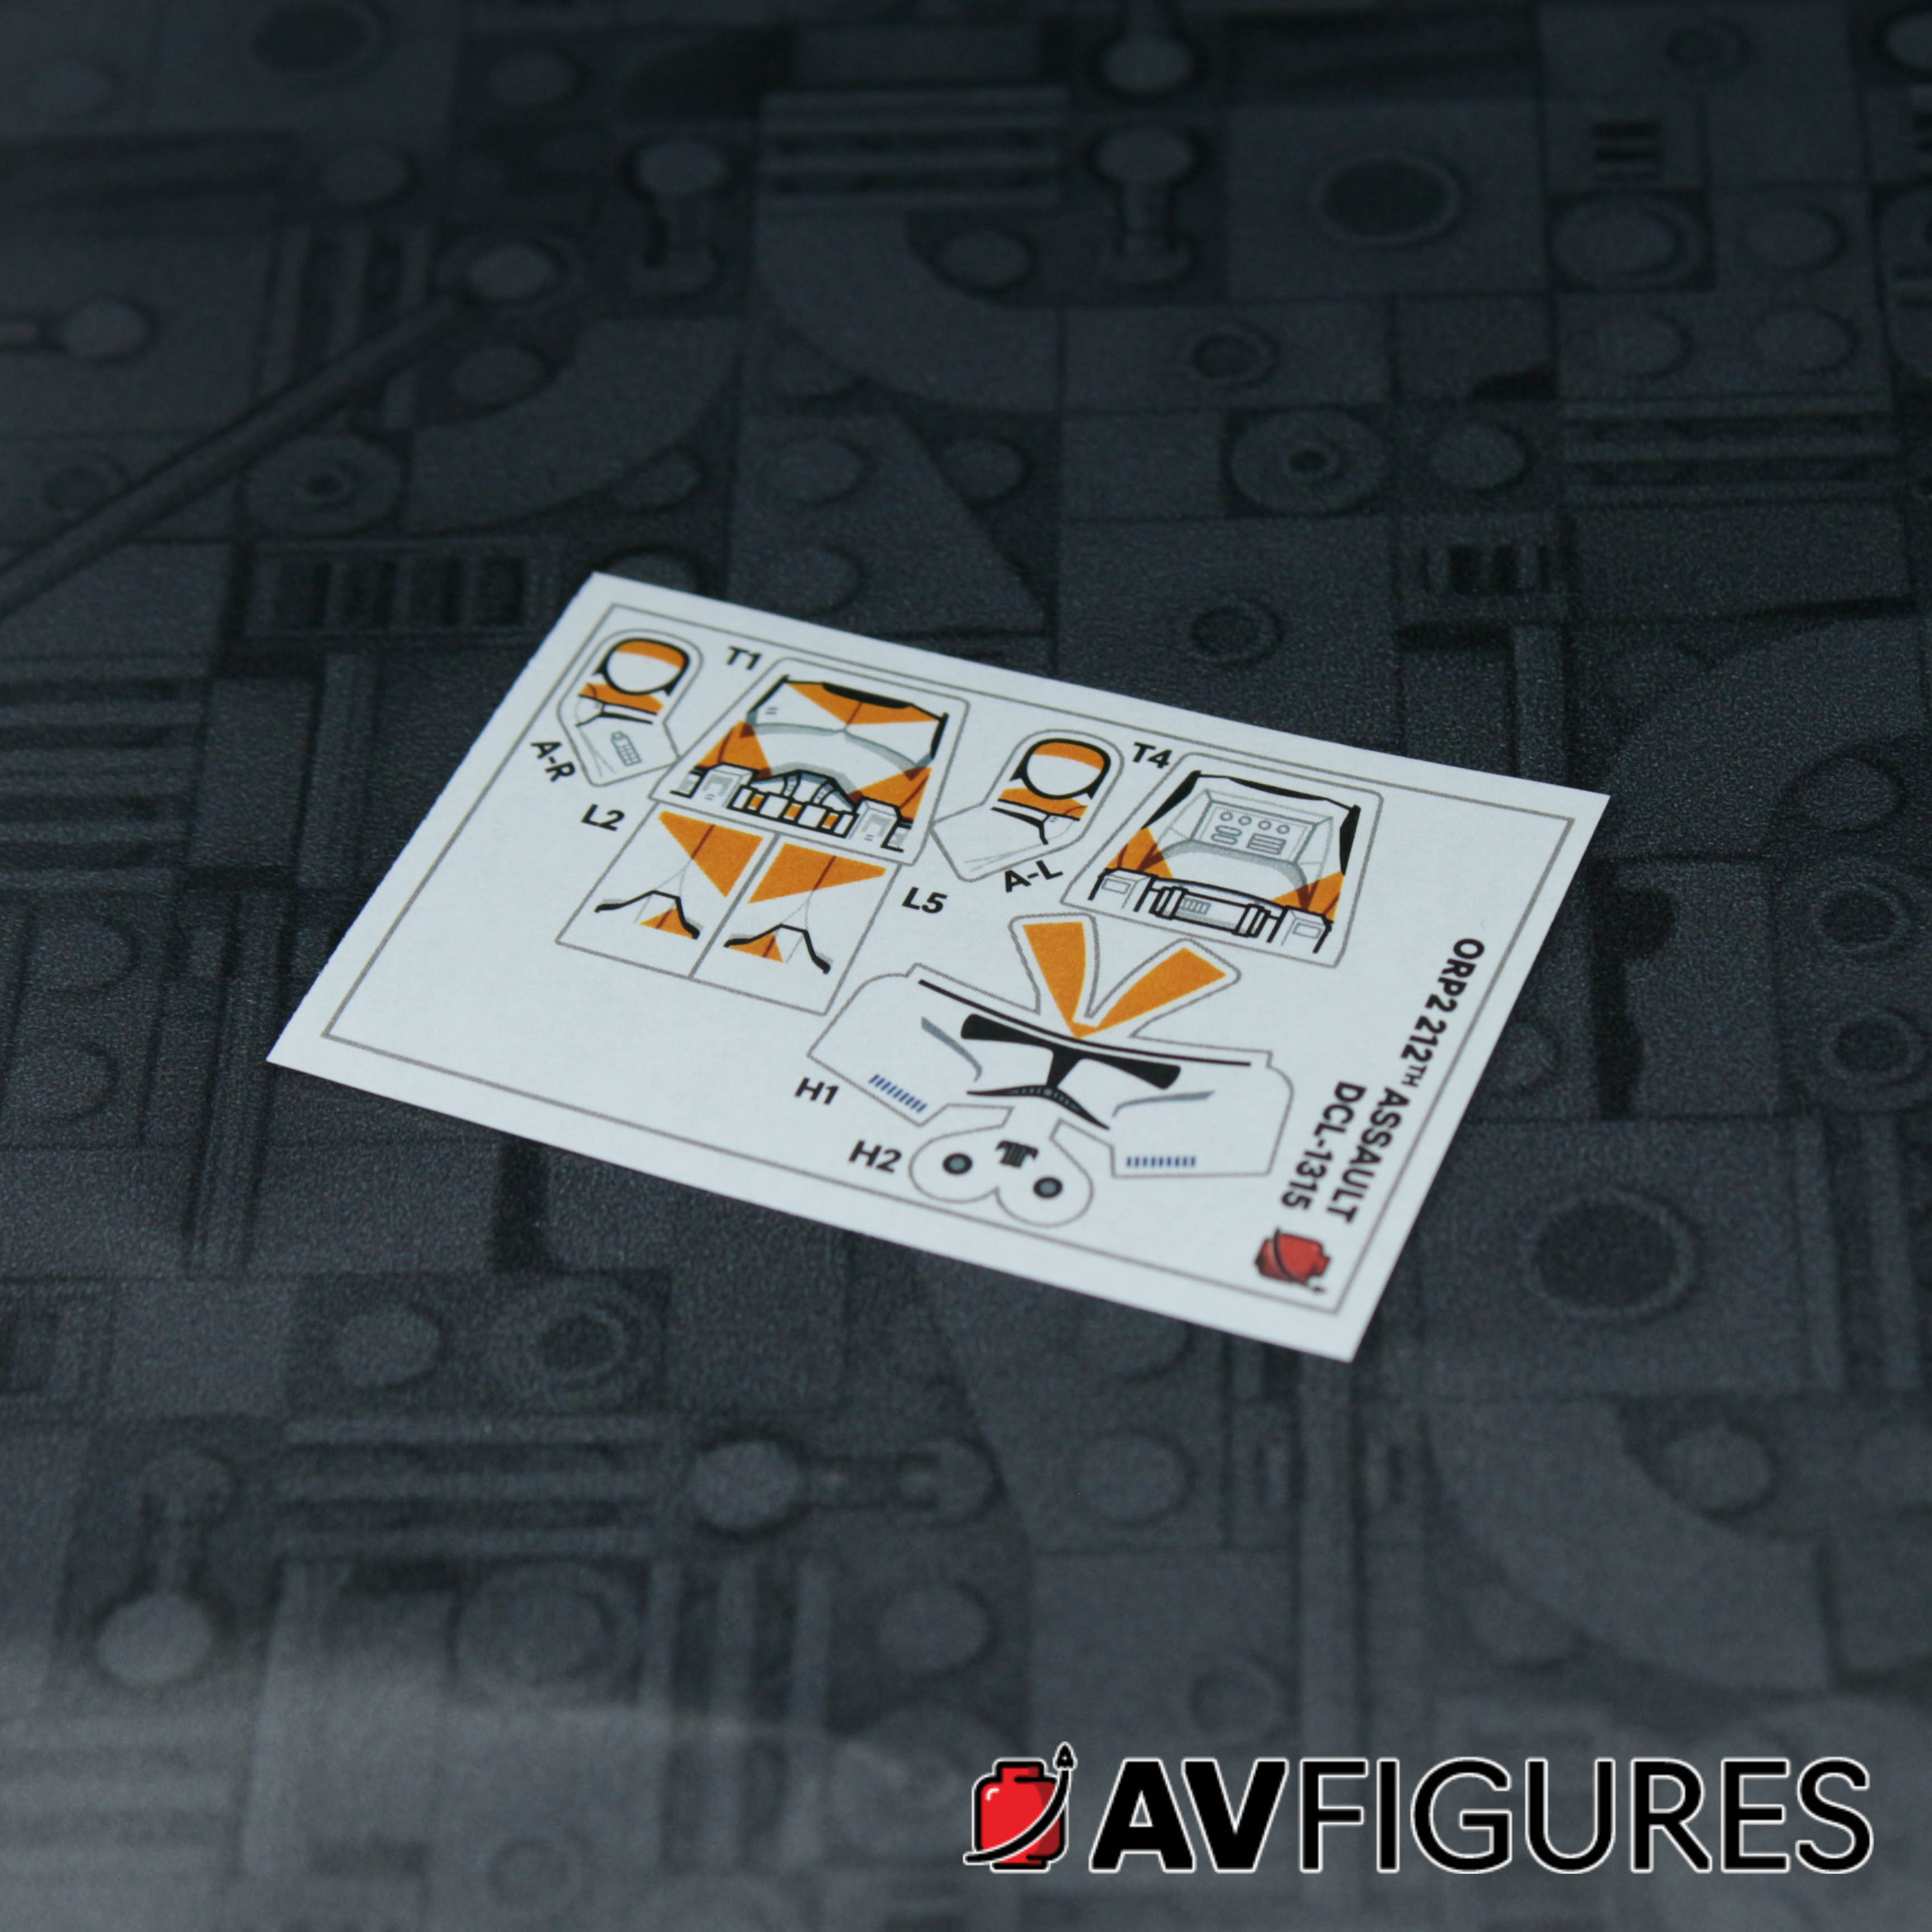 Official-style 212th Assault Decals